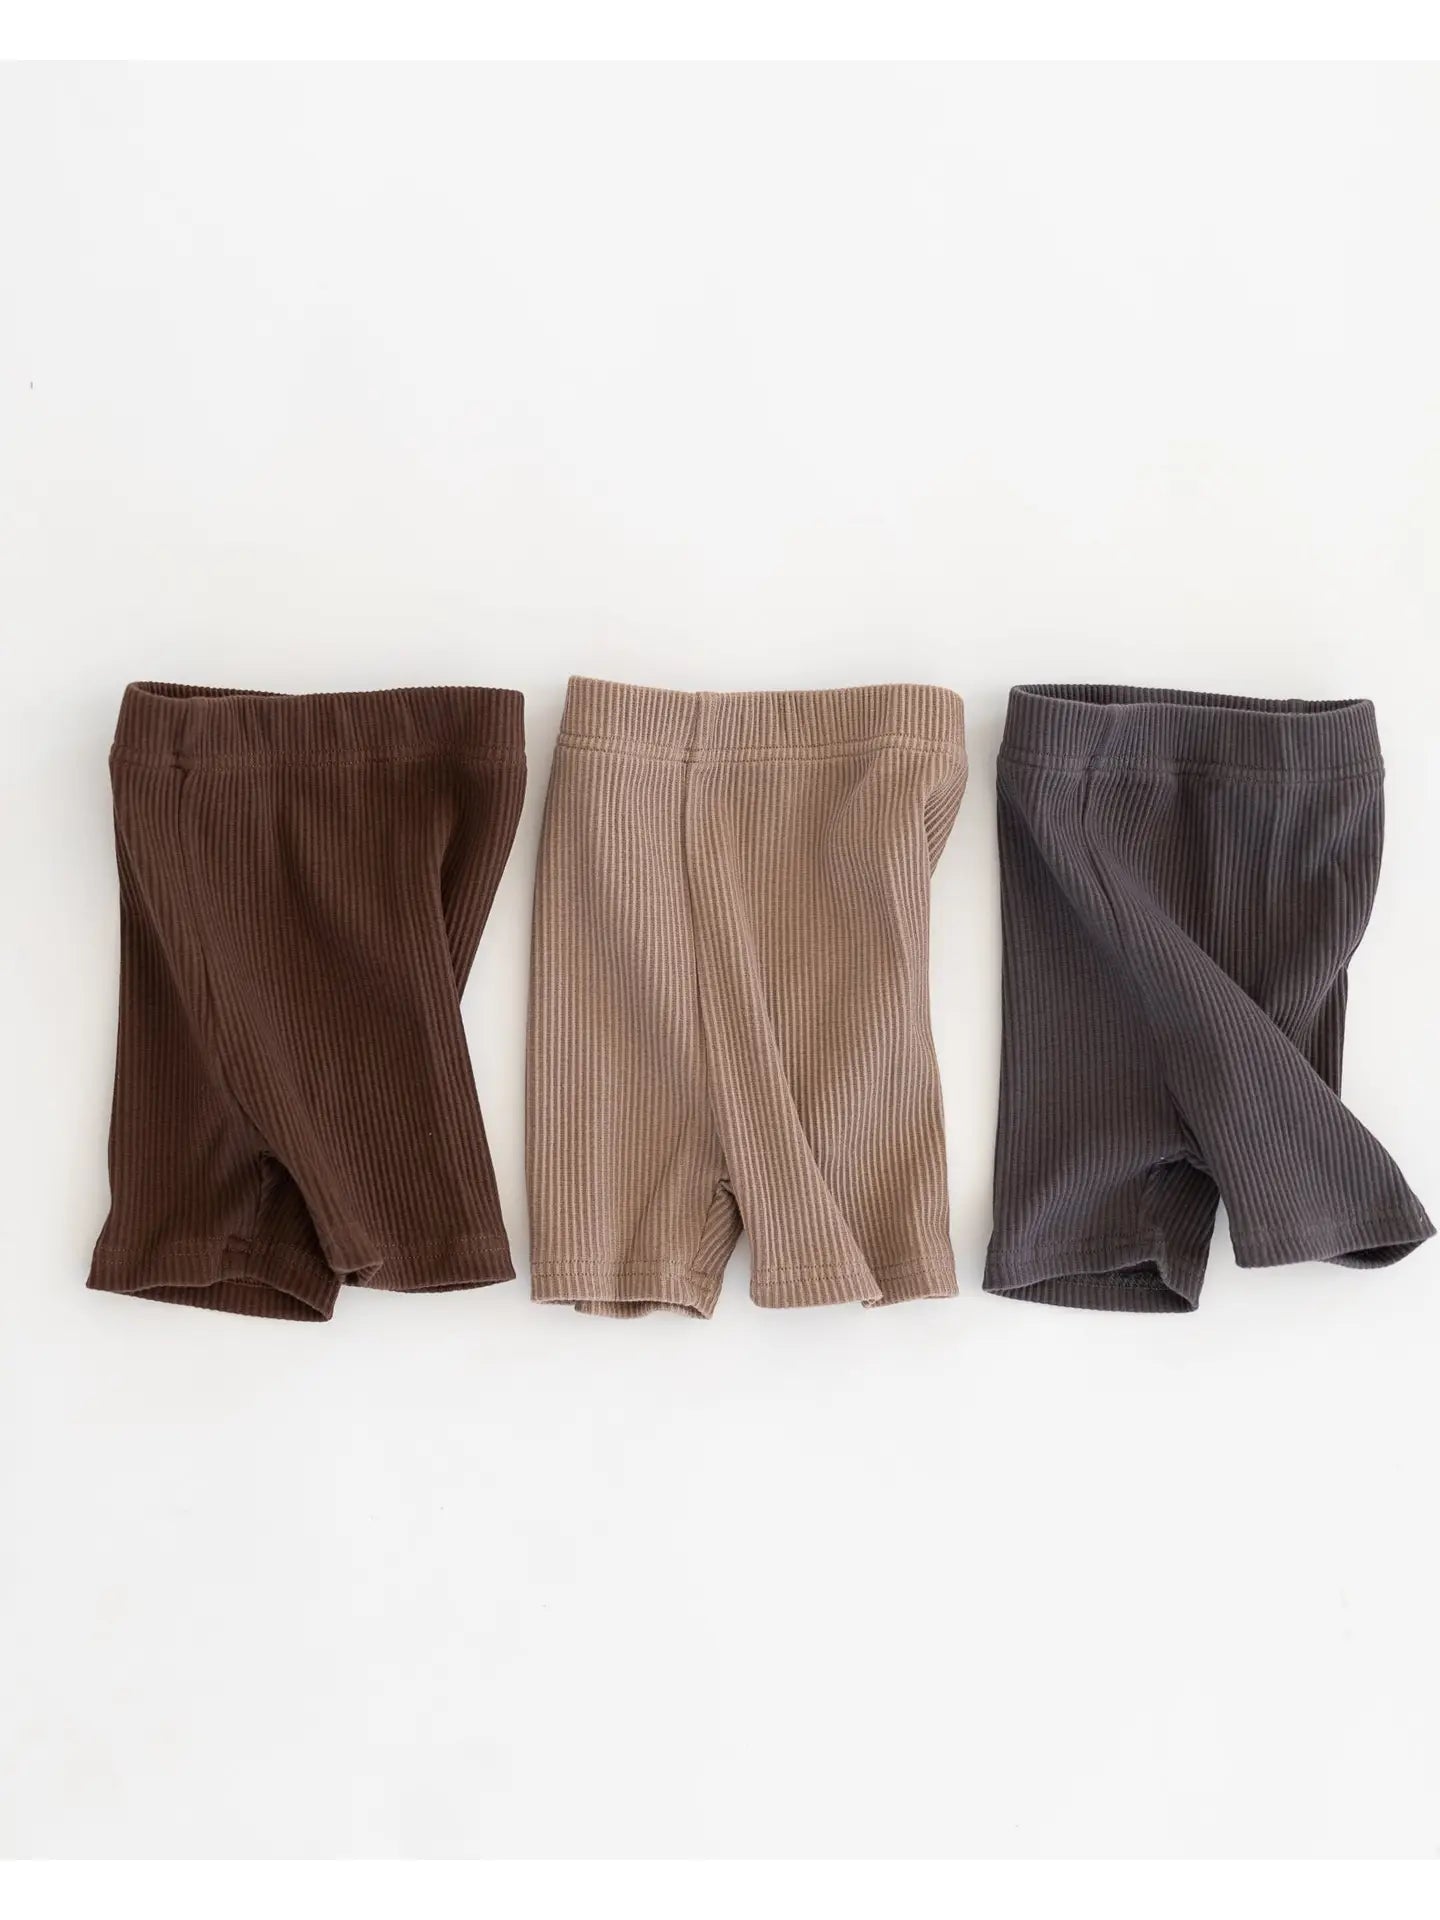 Kindly the Label - Thick Ribbed Bike Shorts (Cocoa)